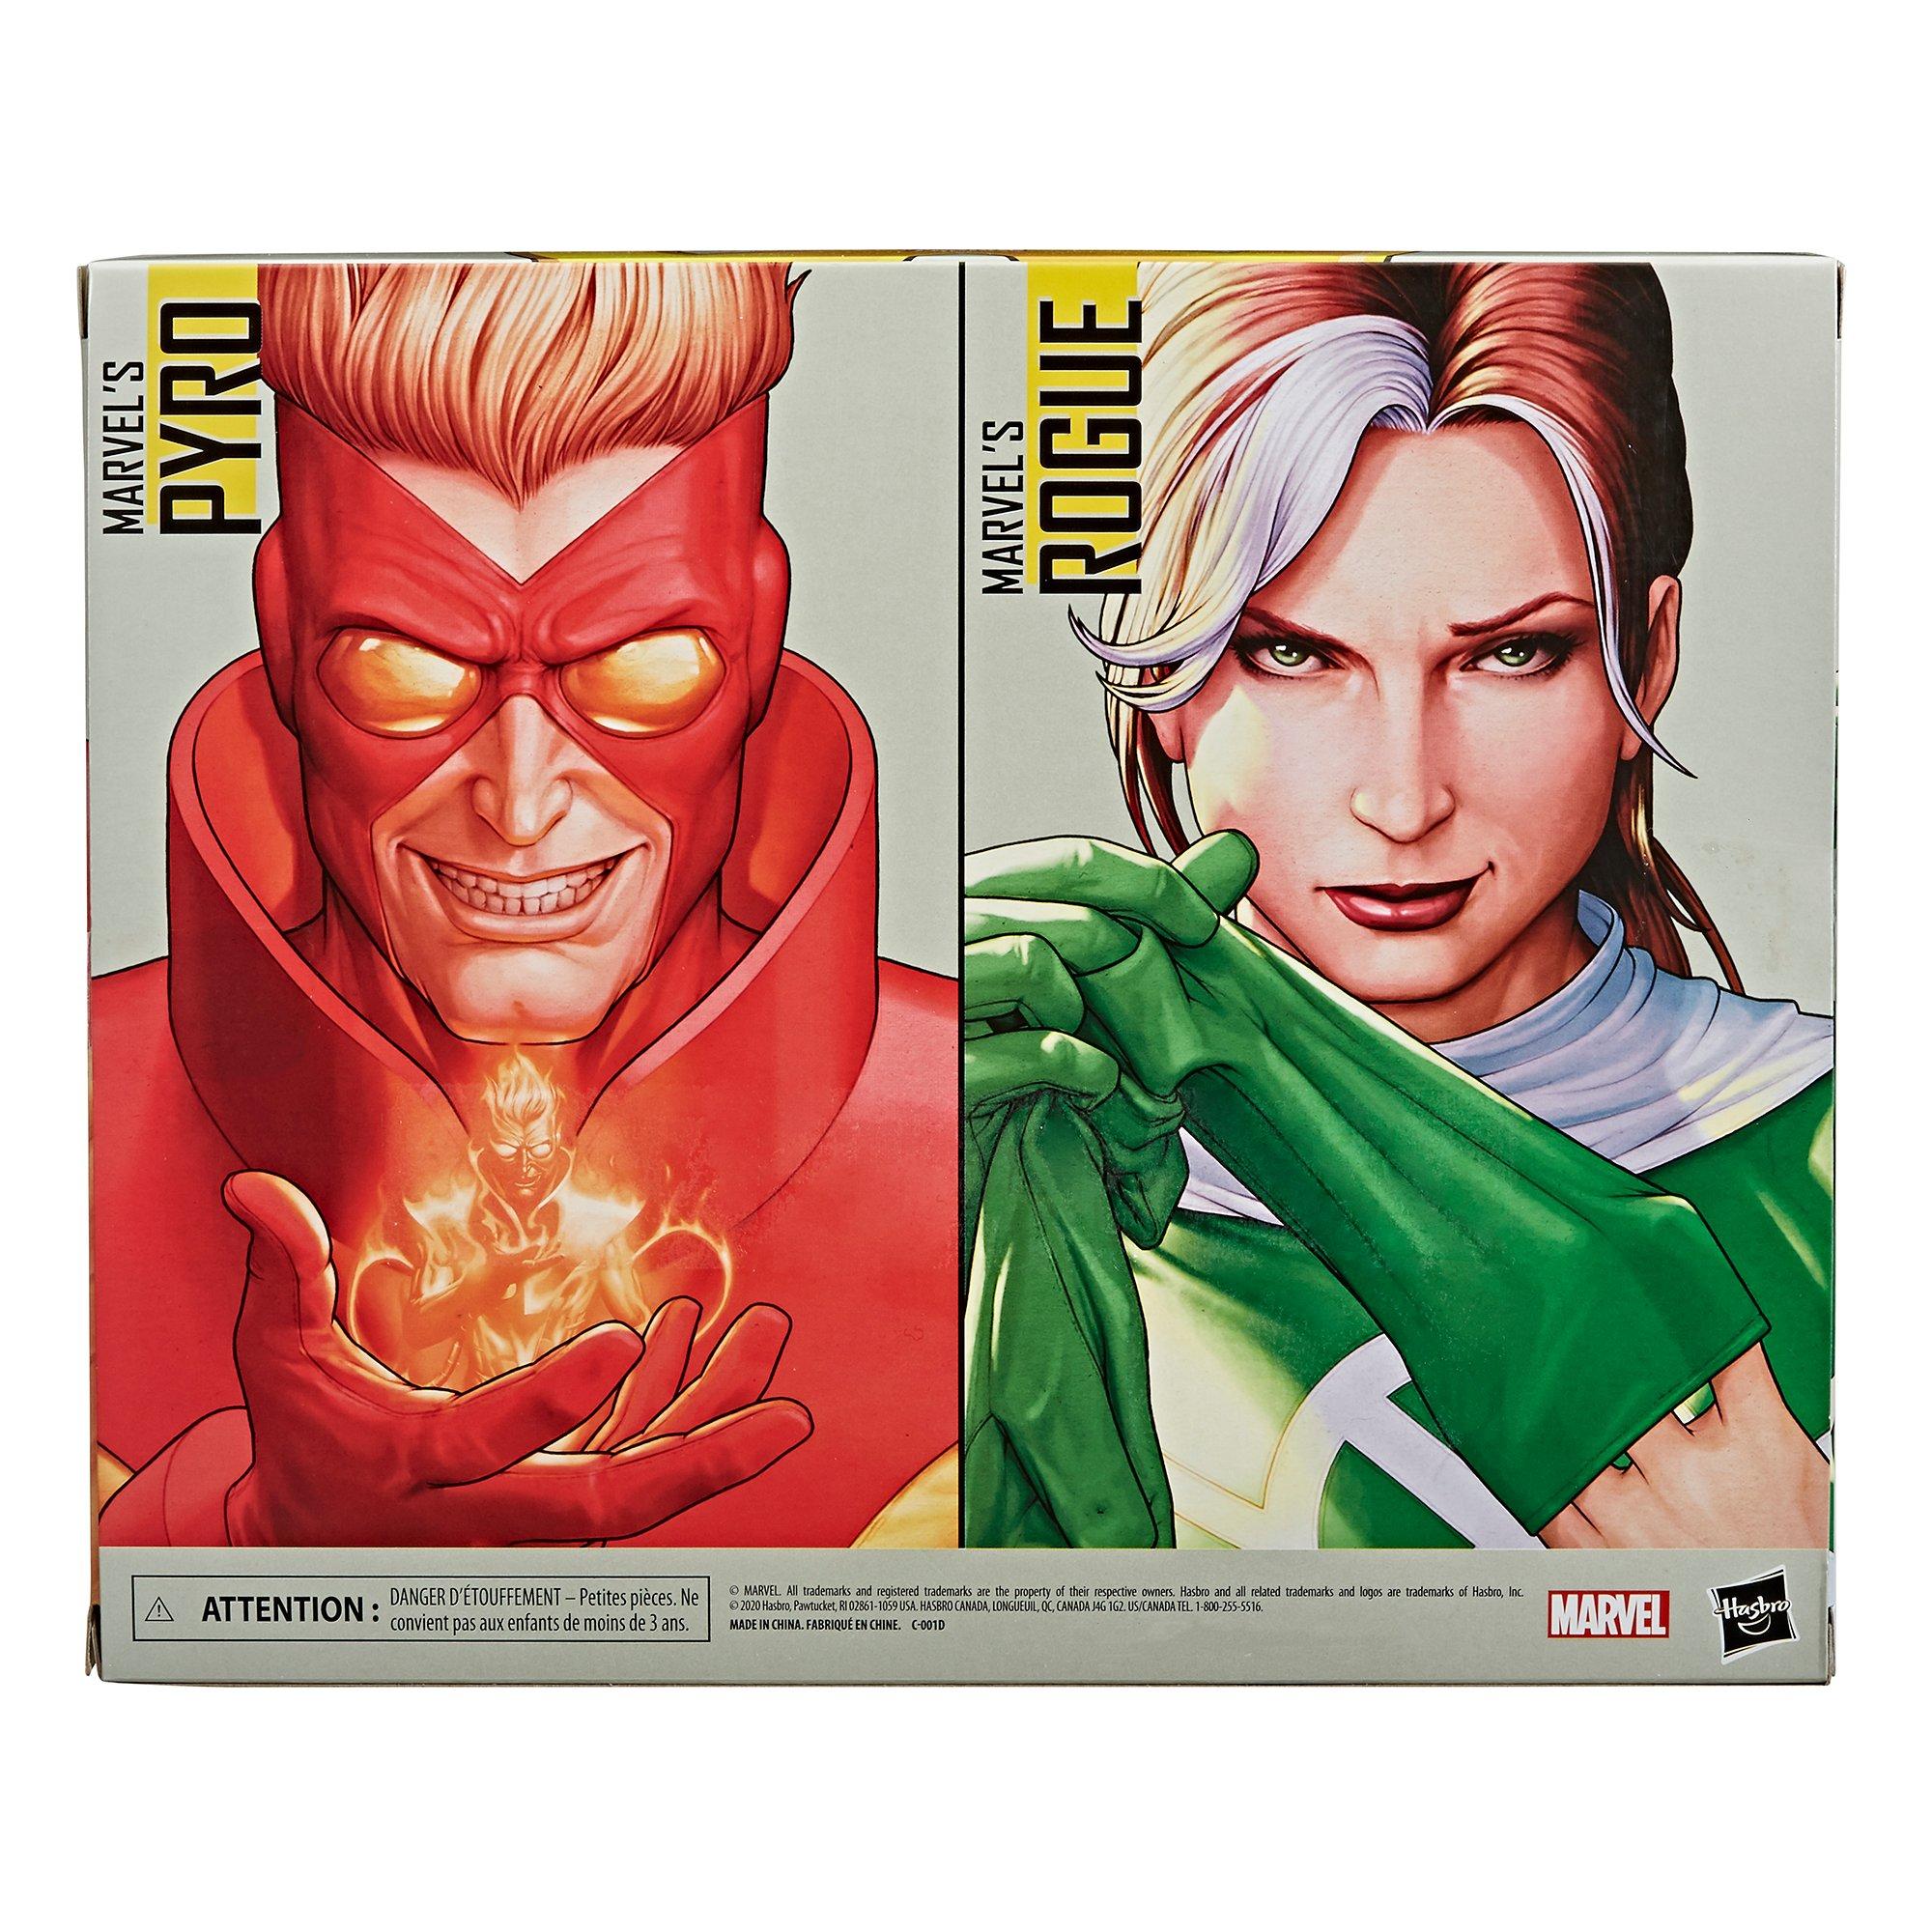 Marvel Legends 6" X-Men COMIC BOOK ROGUE PYRO ACTION FIGURE 2-PACK NEW IN STOCK 